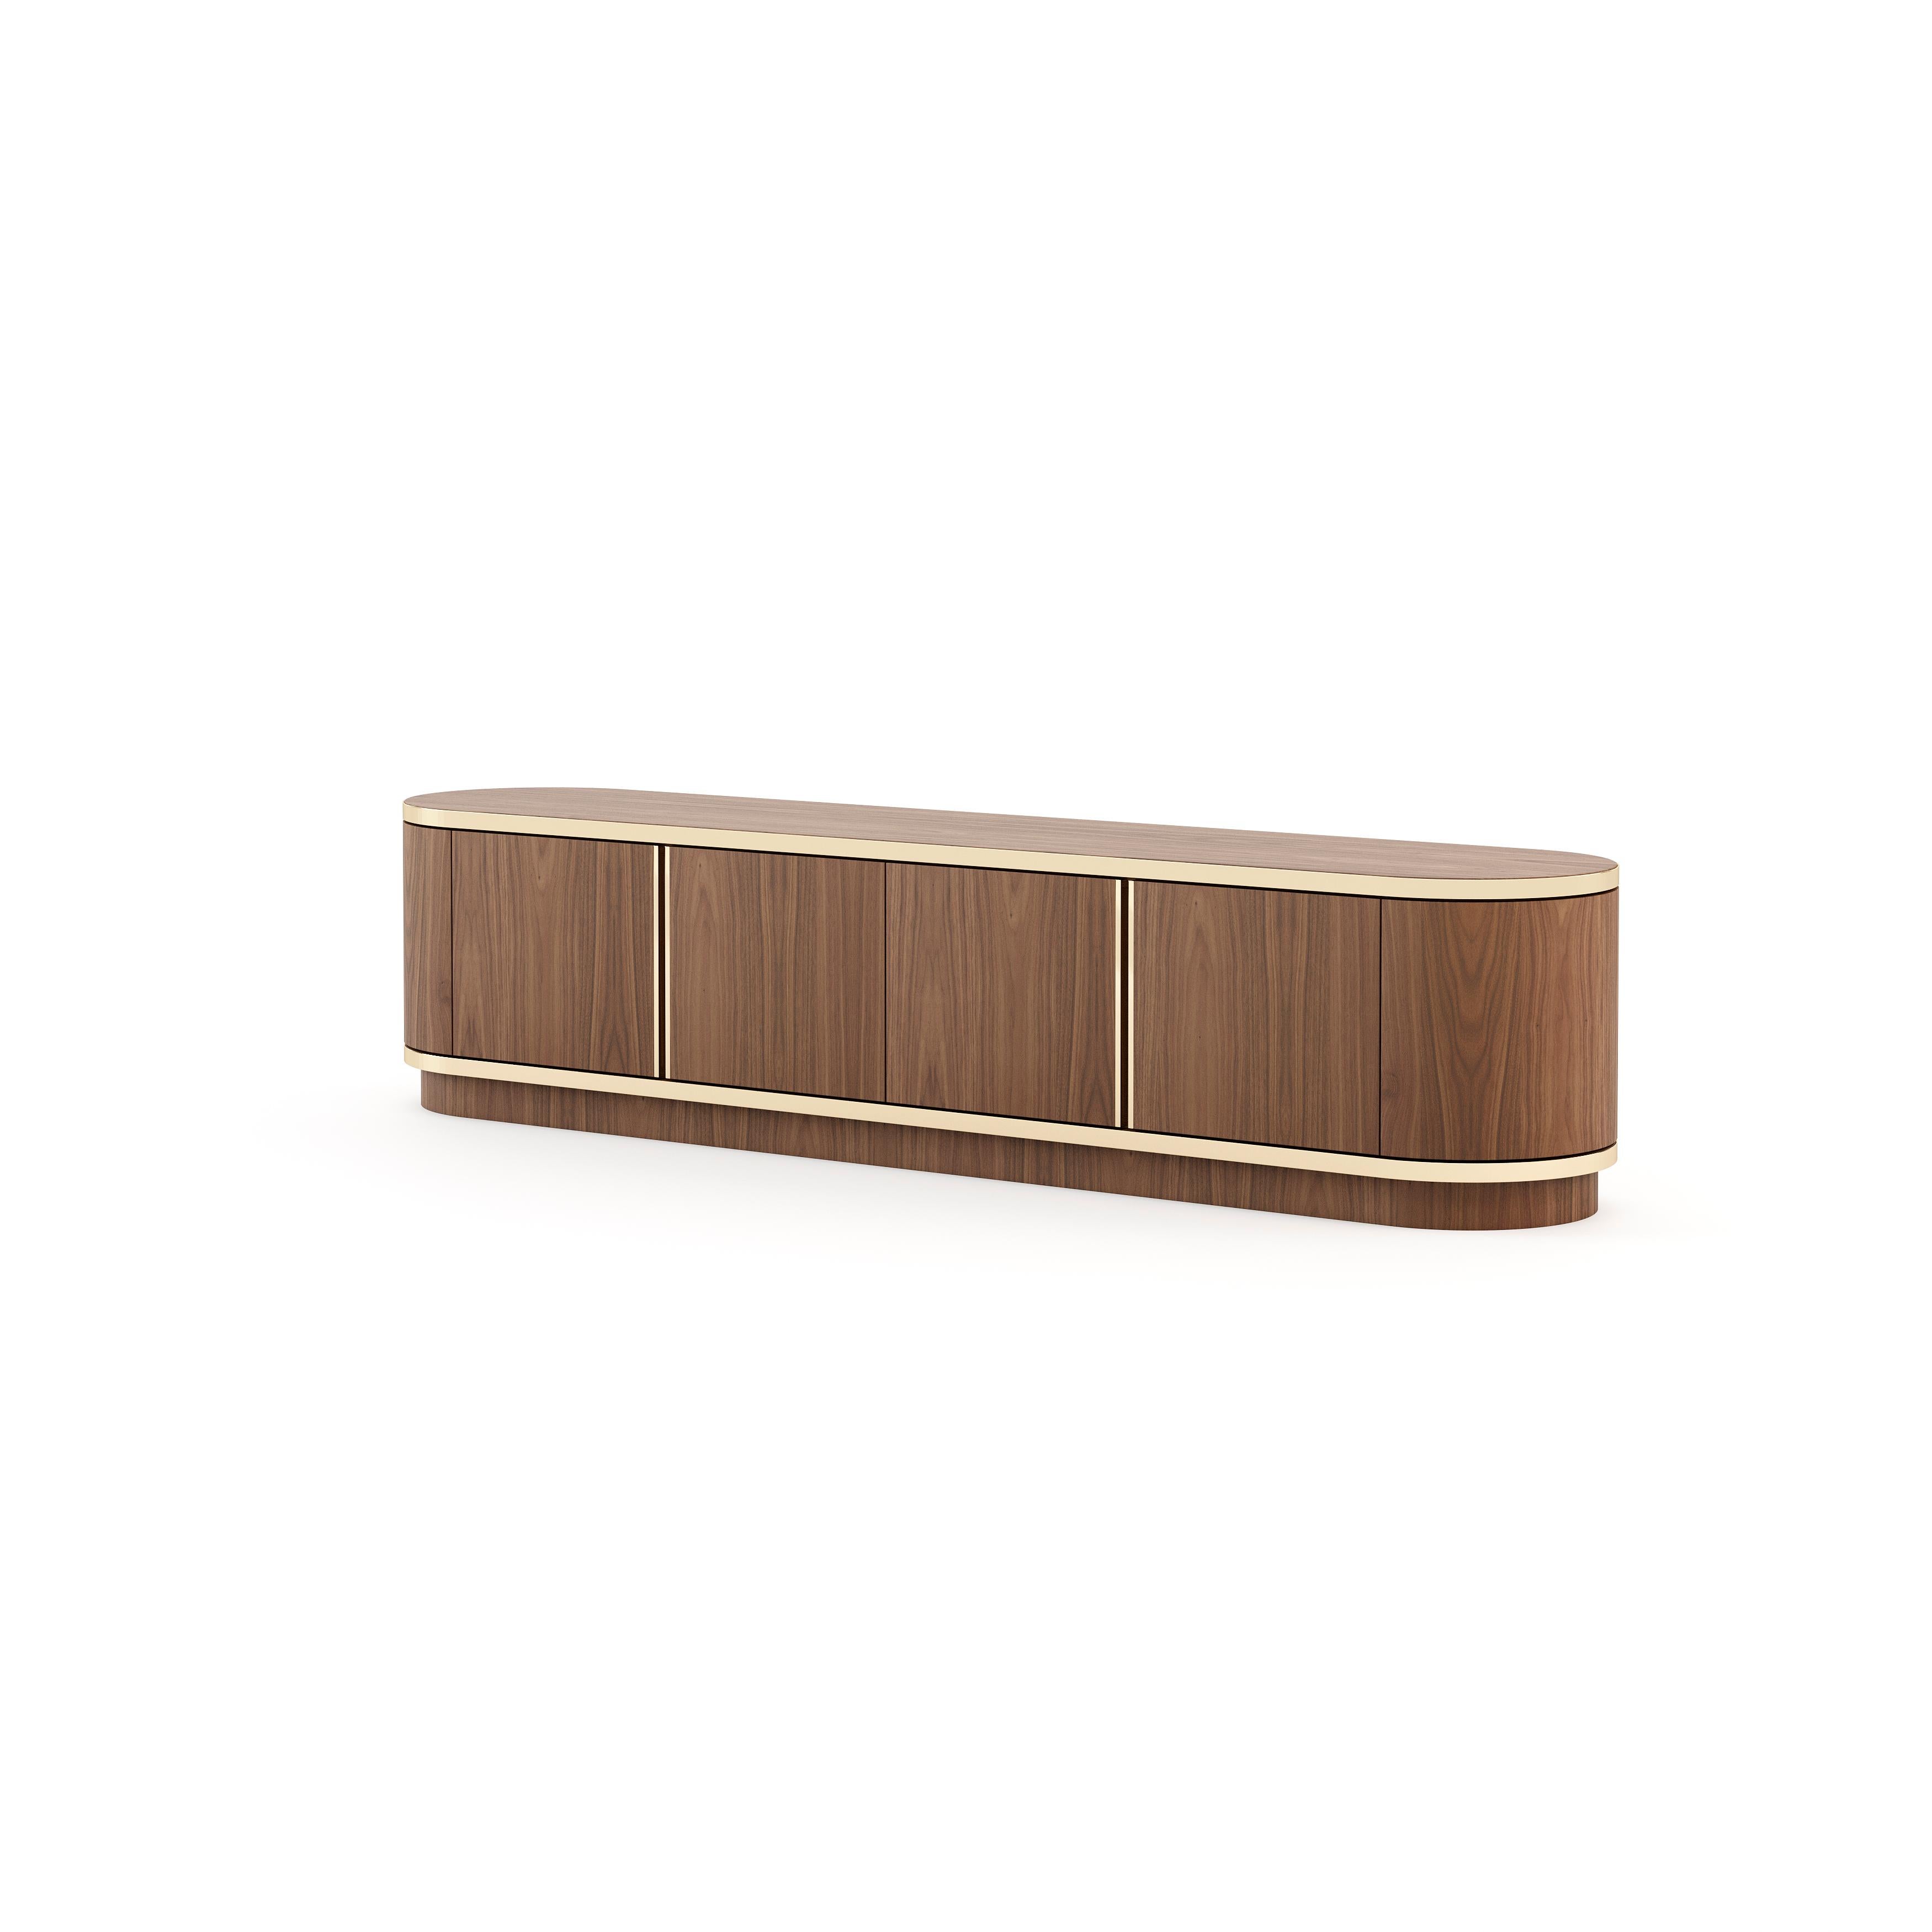 Brown TV cabinet is a peculiar storage piece that draws inspiration from the aesthetics of 20´s marvelous design. Part of the Brown family, this TV table is stunningly produced in wood. Classic meets contemporary and creates a timeless product for